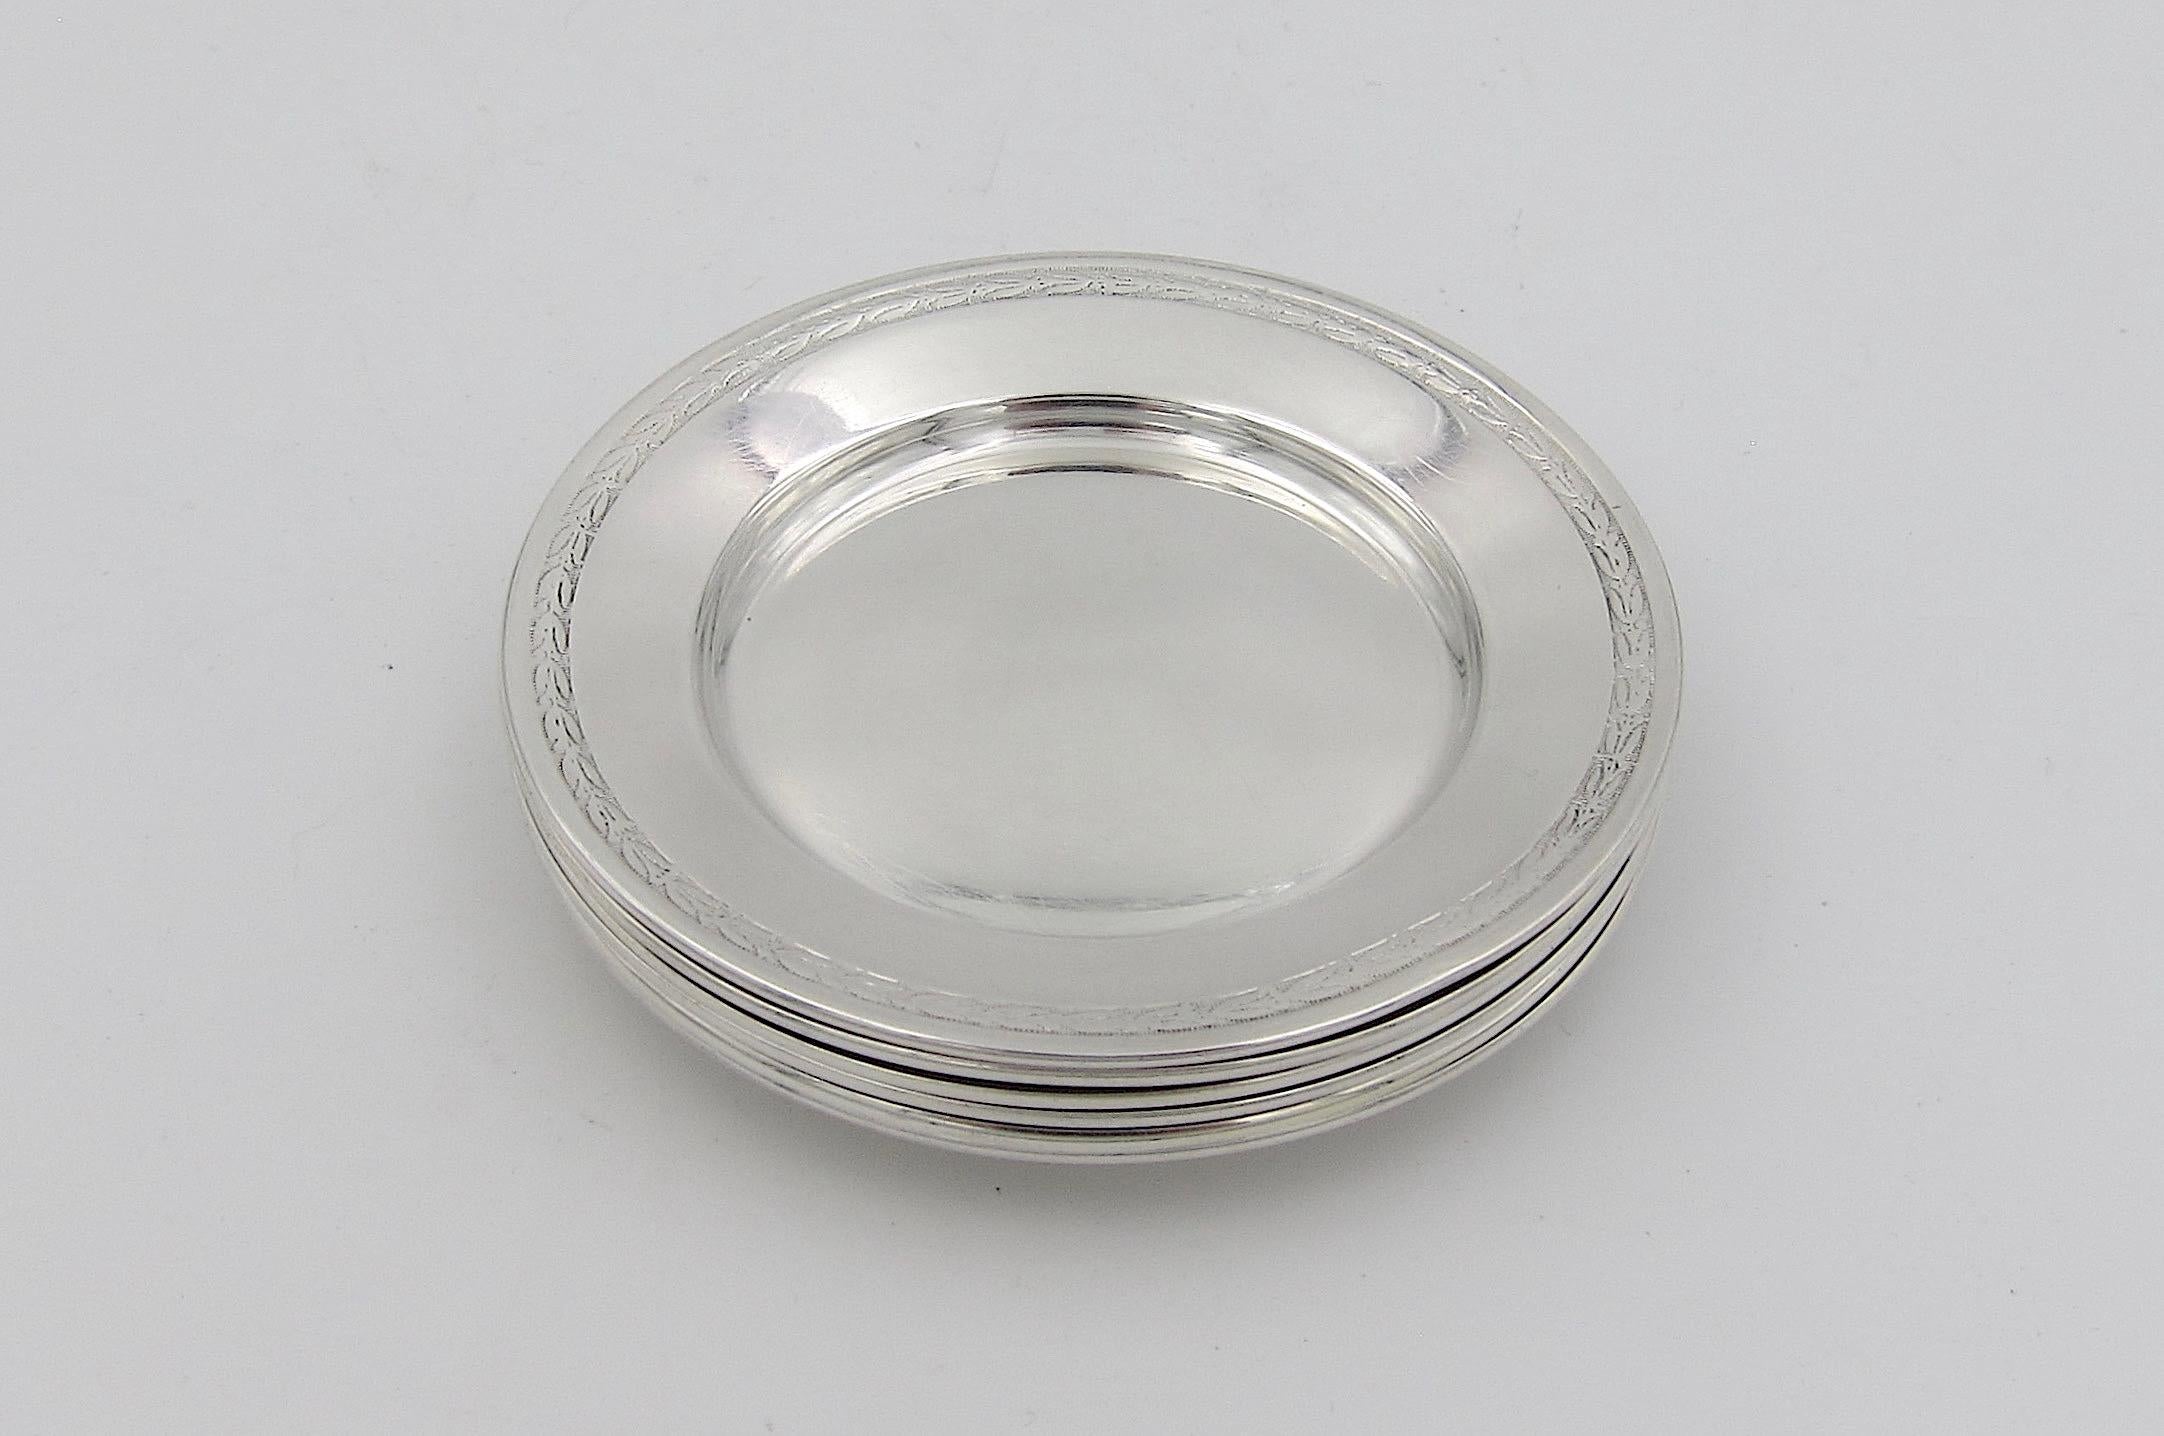 An antique matching set of six round, individual butter pats in sterling silver from Gorham Manufacturing Company of Providence, Rhode Island. Decorated with an elegant engraved band encircling each rim with an 1872 date mark underfoot. No